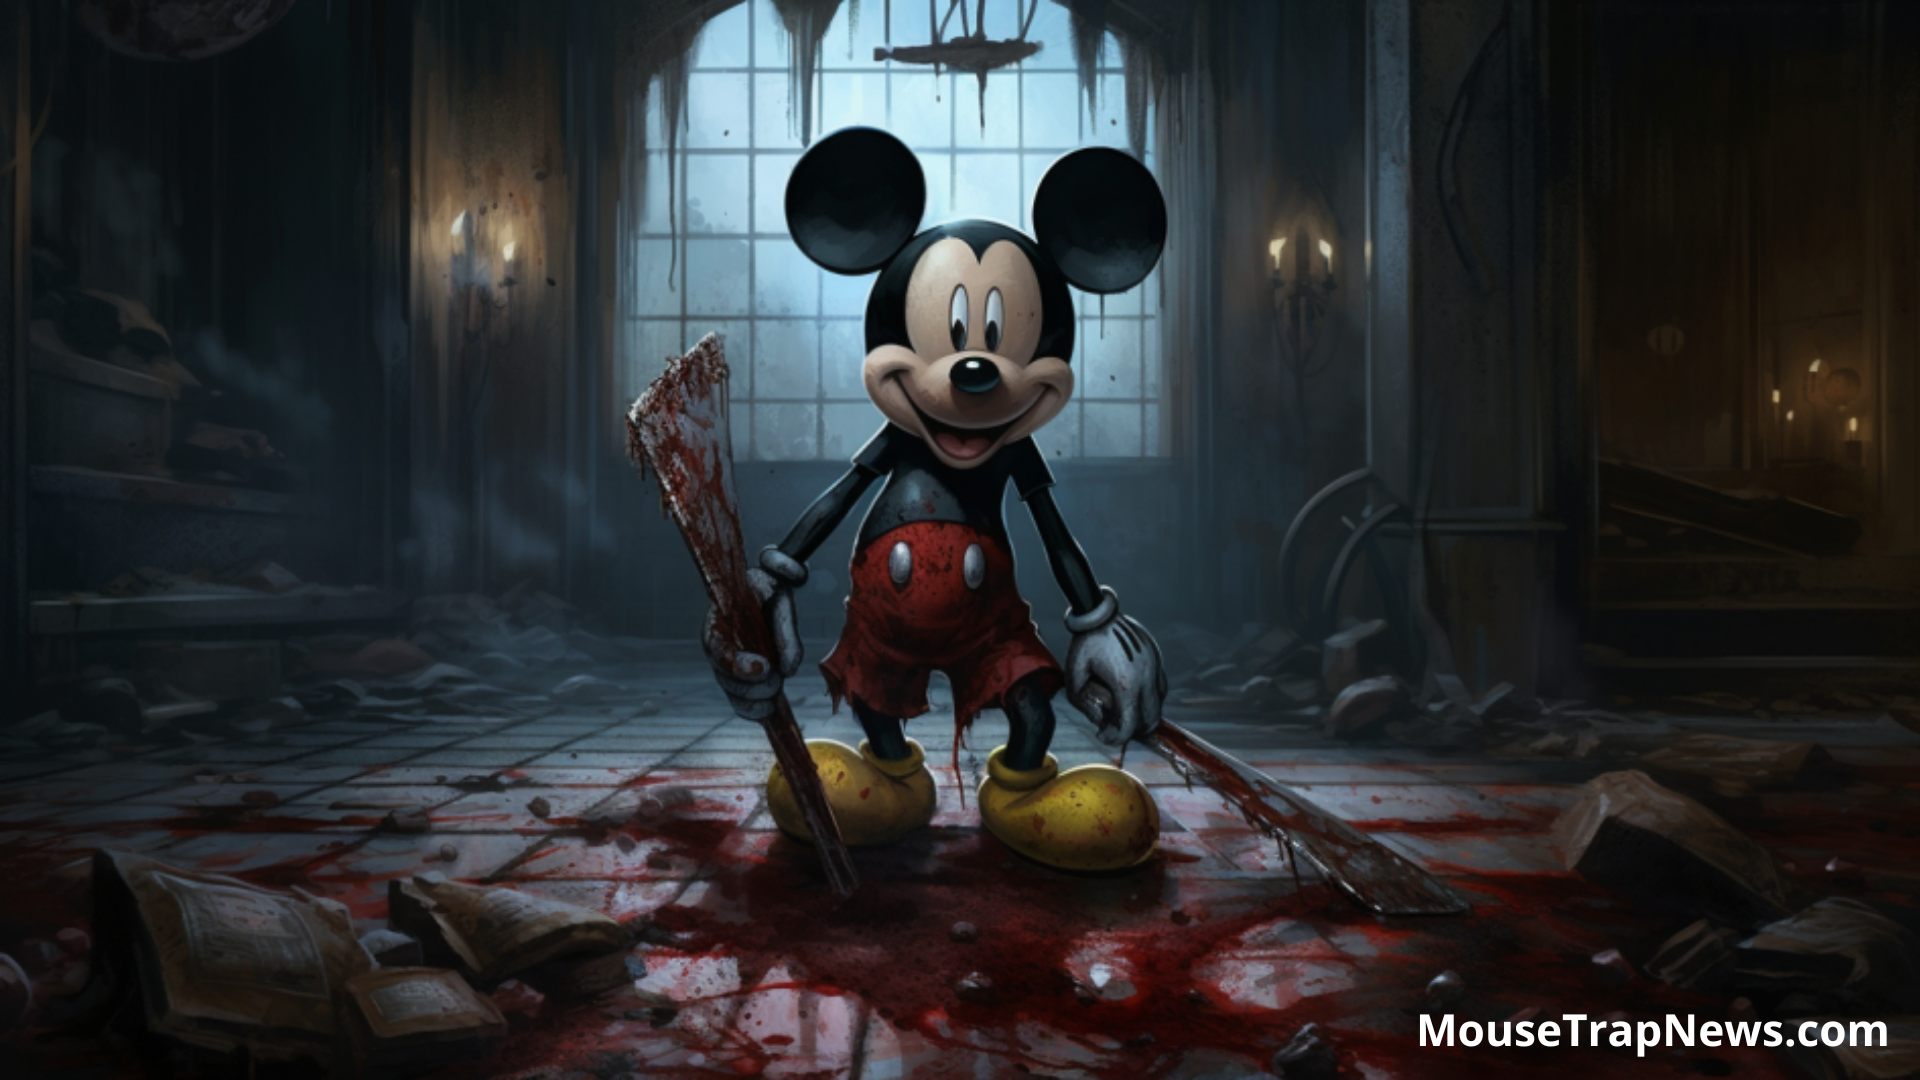 Mickey Mouse's Midnight Massacre is Disney's newest R-rated horror movie